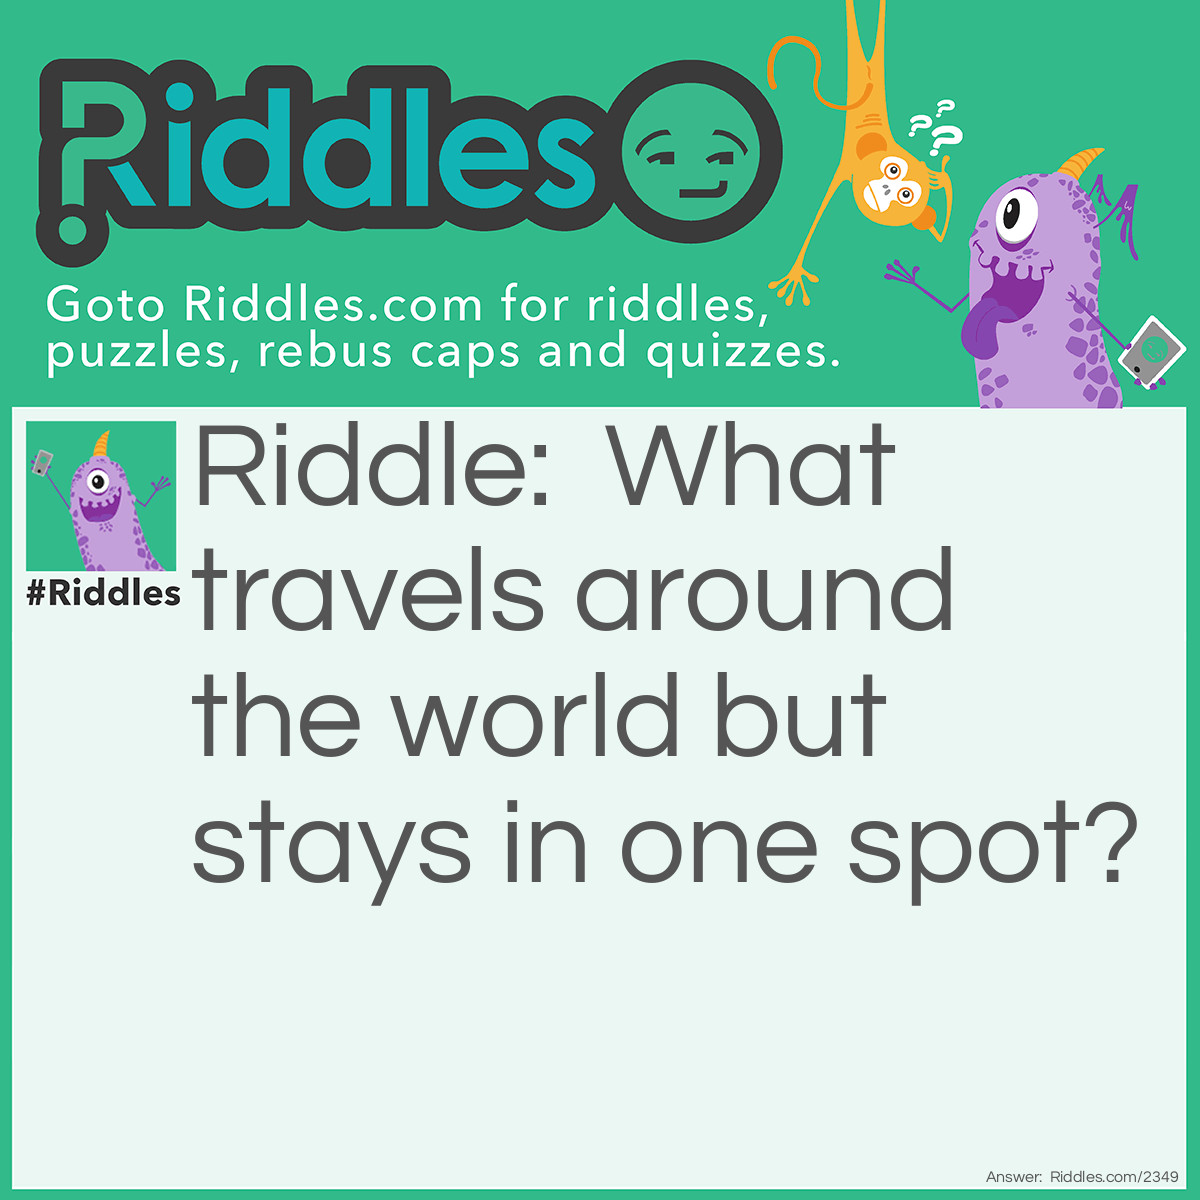 Riddle: What travels around the world but stays in one spot? Answer: A stamp.